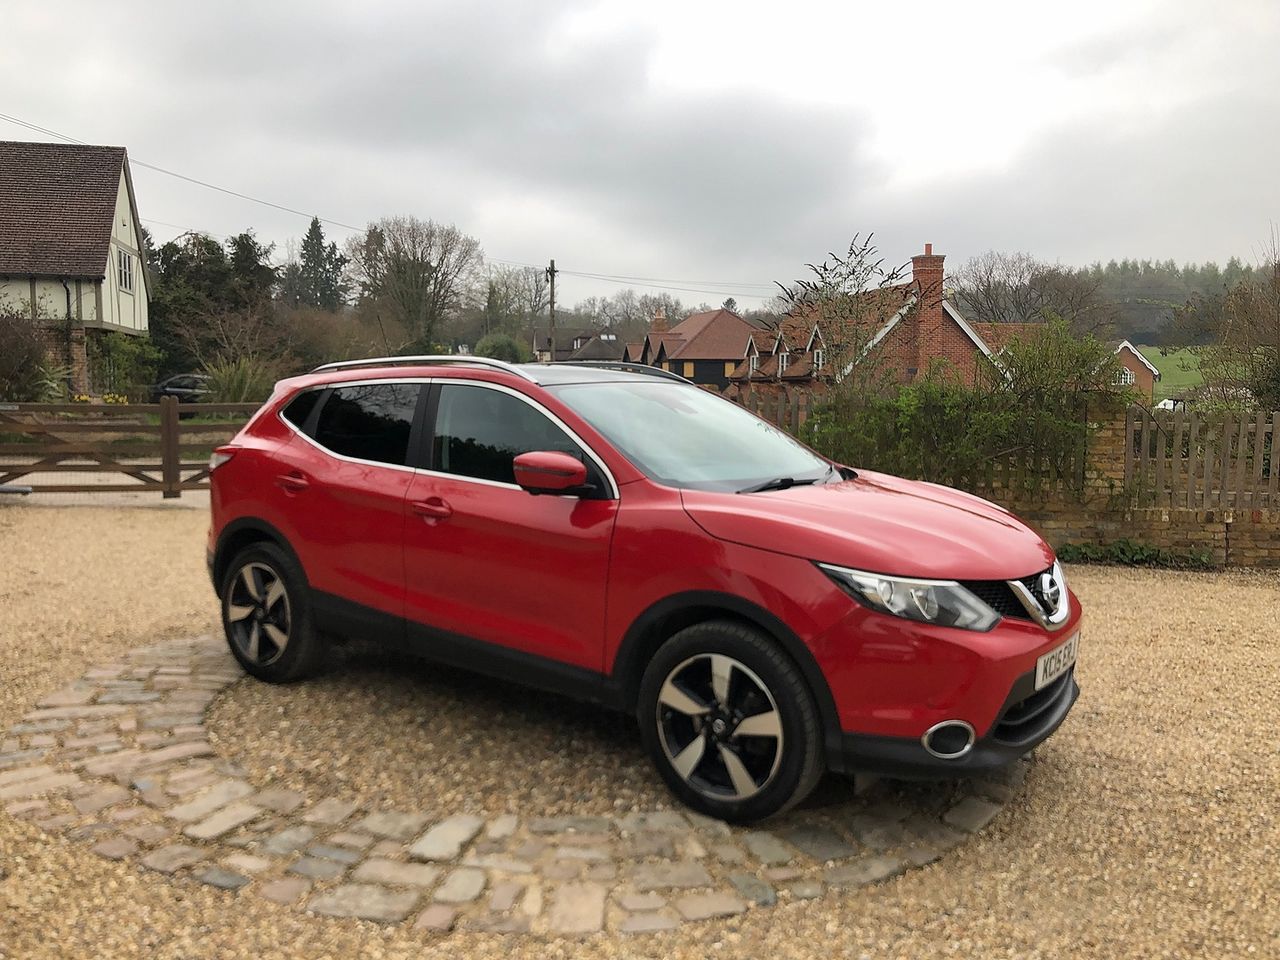 2015 NISSAN QASHQAI n-tec 1.6 dCi 130PS Xtronic - Picture 1 of 11